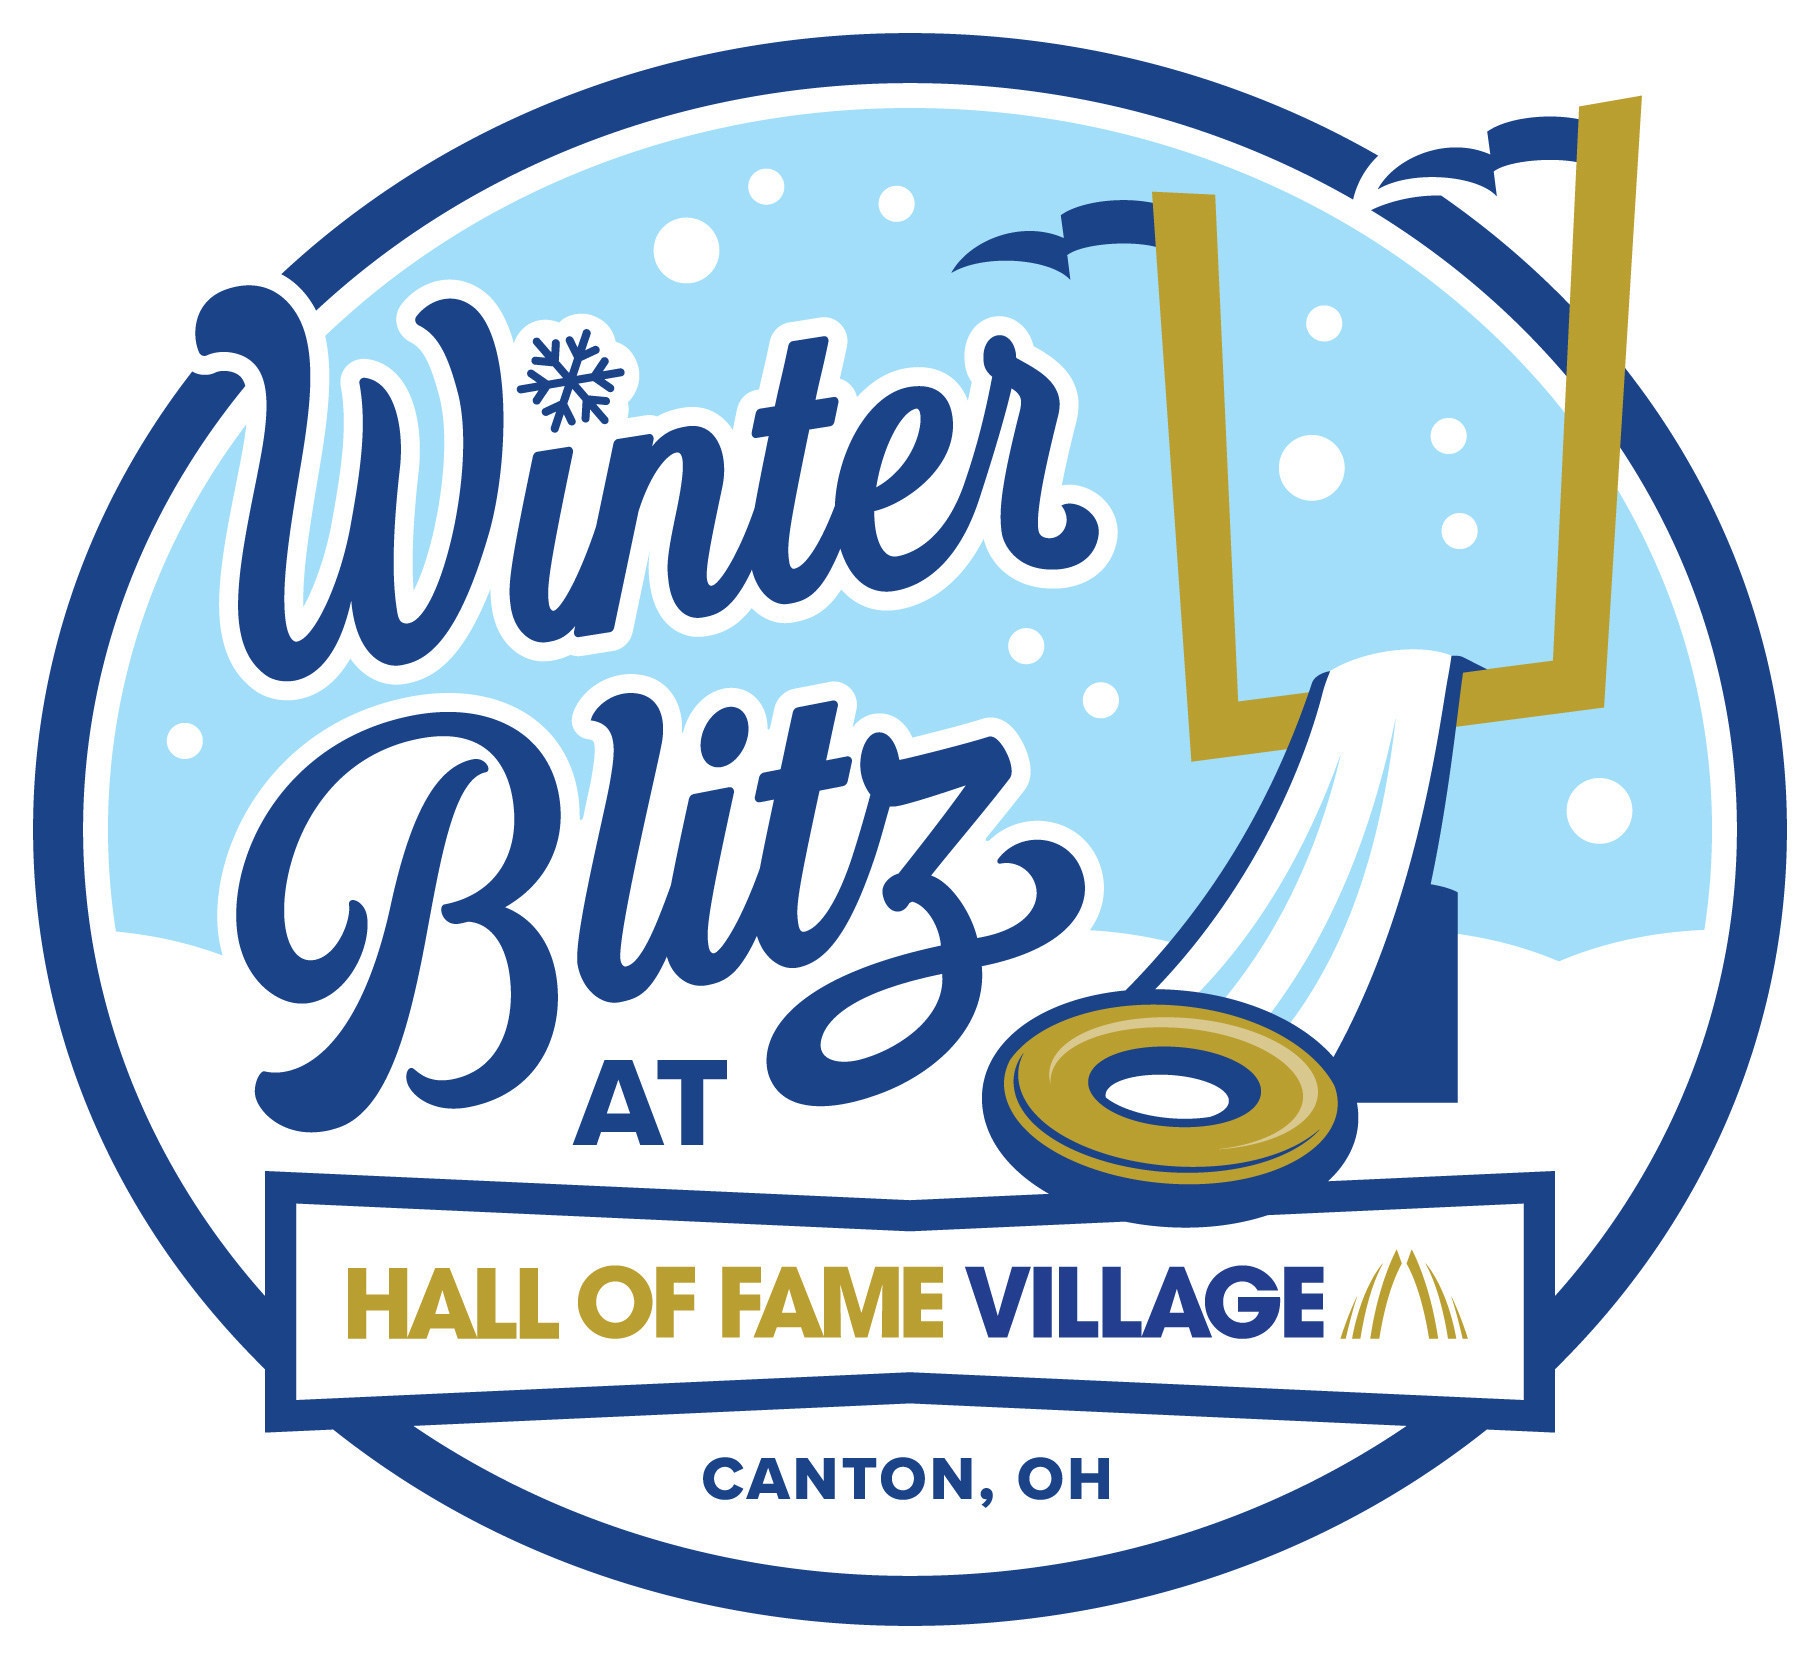 Winter Blitz at Hall of Fame Village Features Tube Sledding Through the